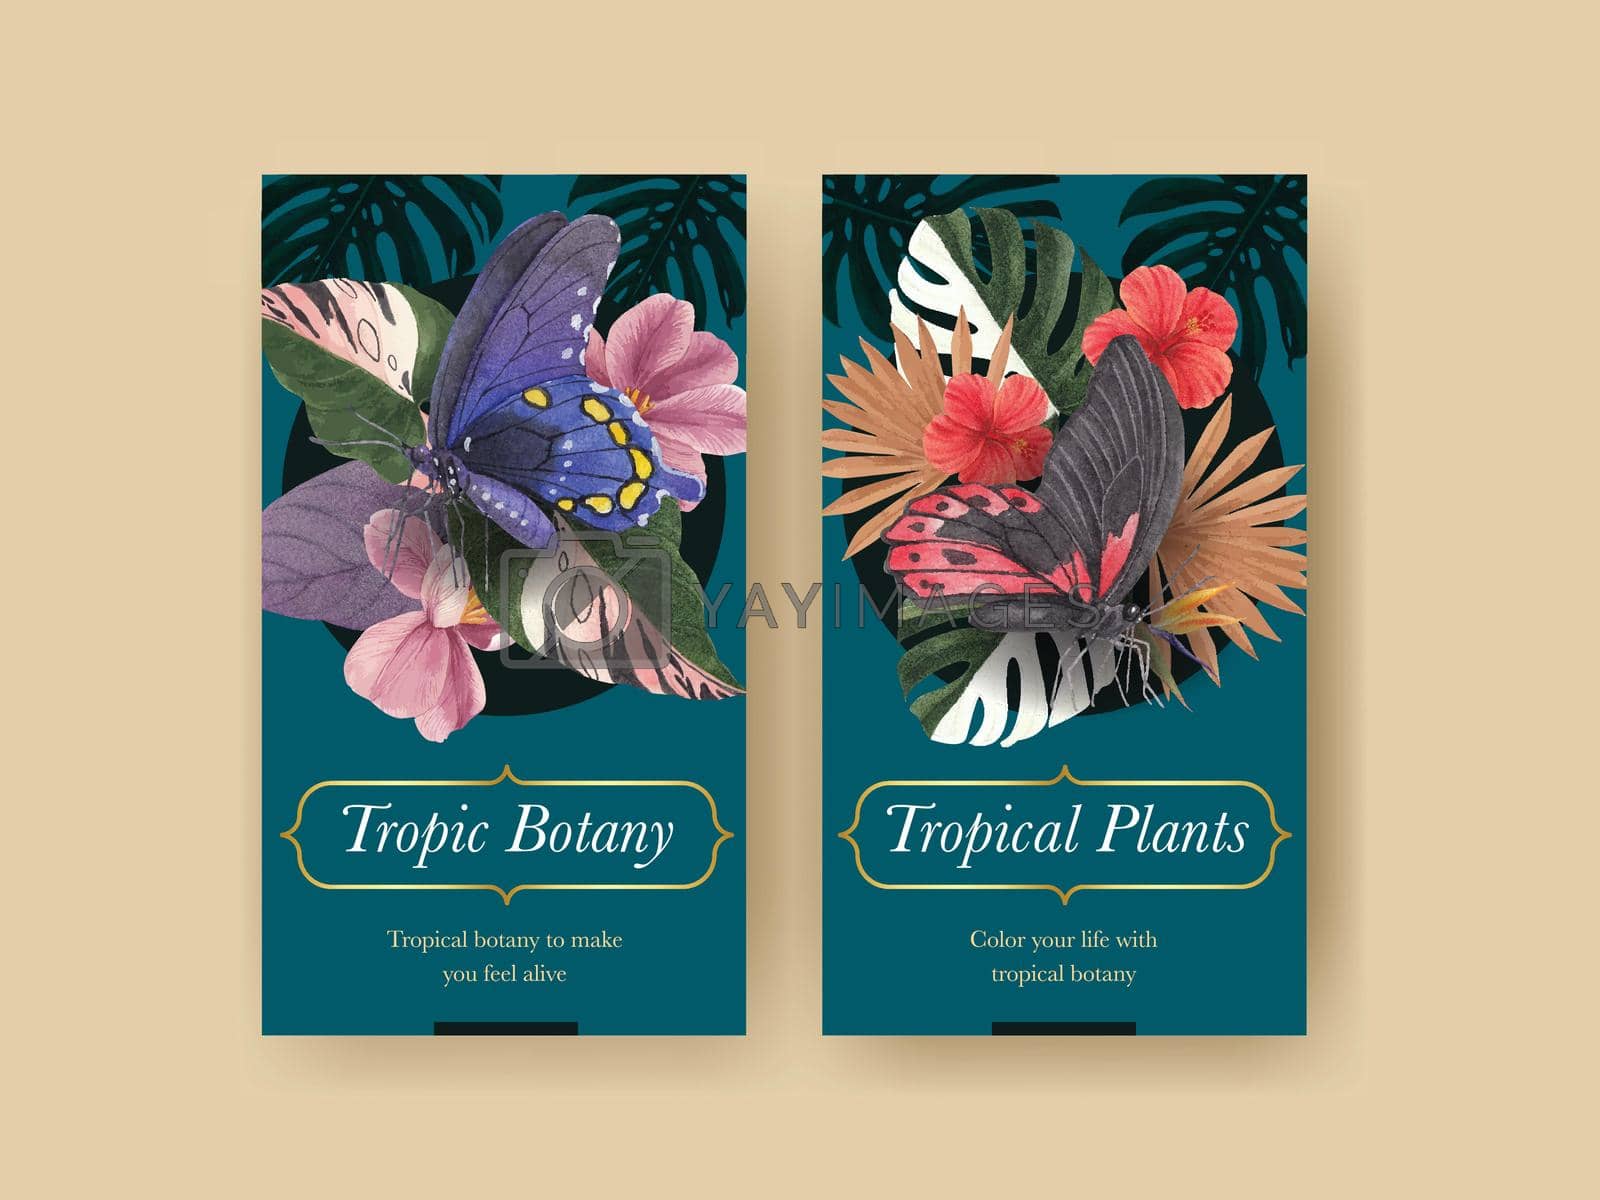 Royalty free image of Instagram template with tropical botany concept, watercolor style by Photographeeasia